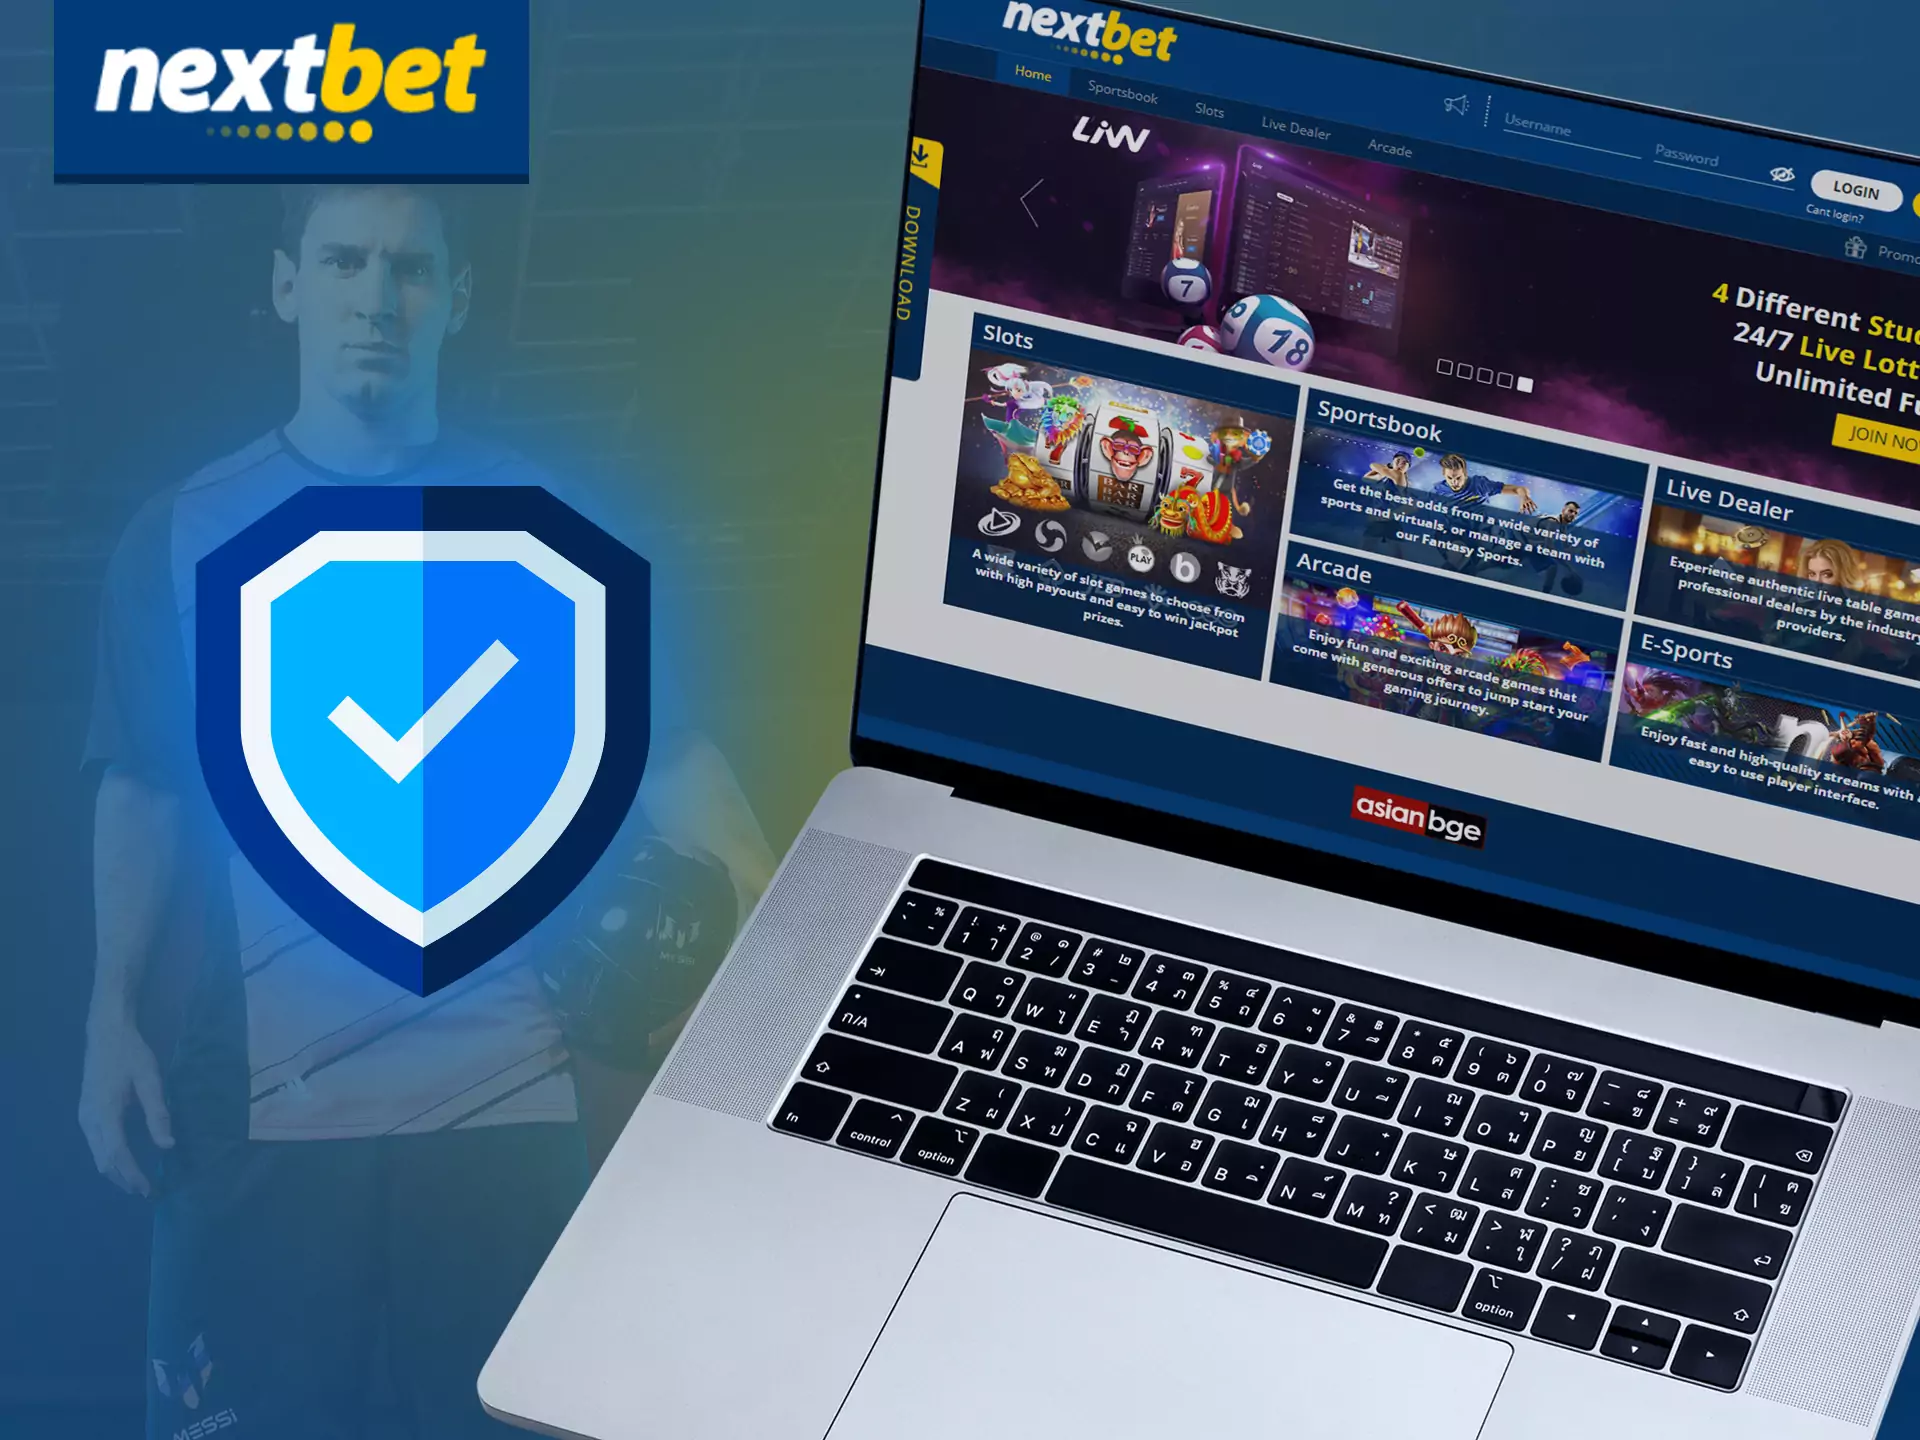 Nextbet service is safe for users and your data is secure.